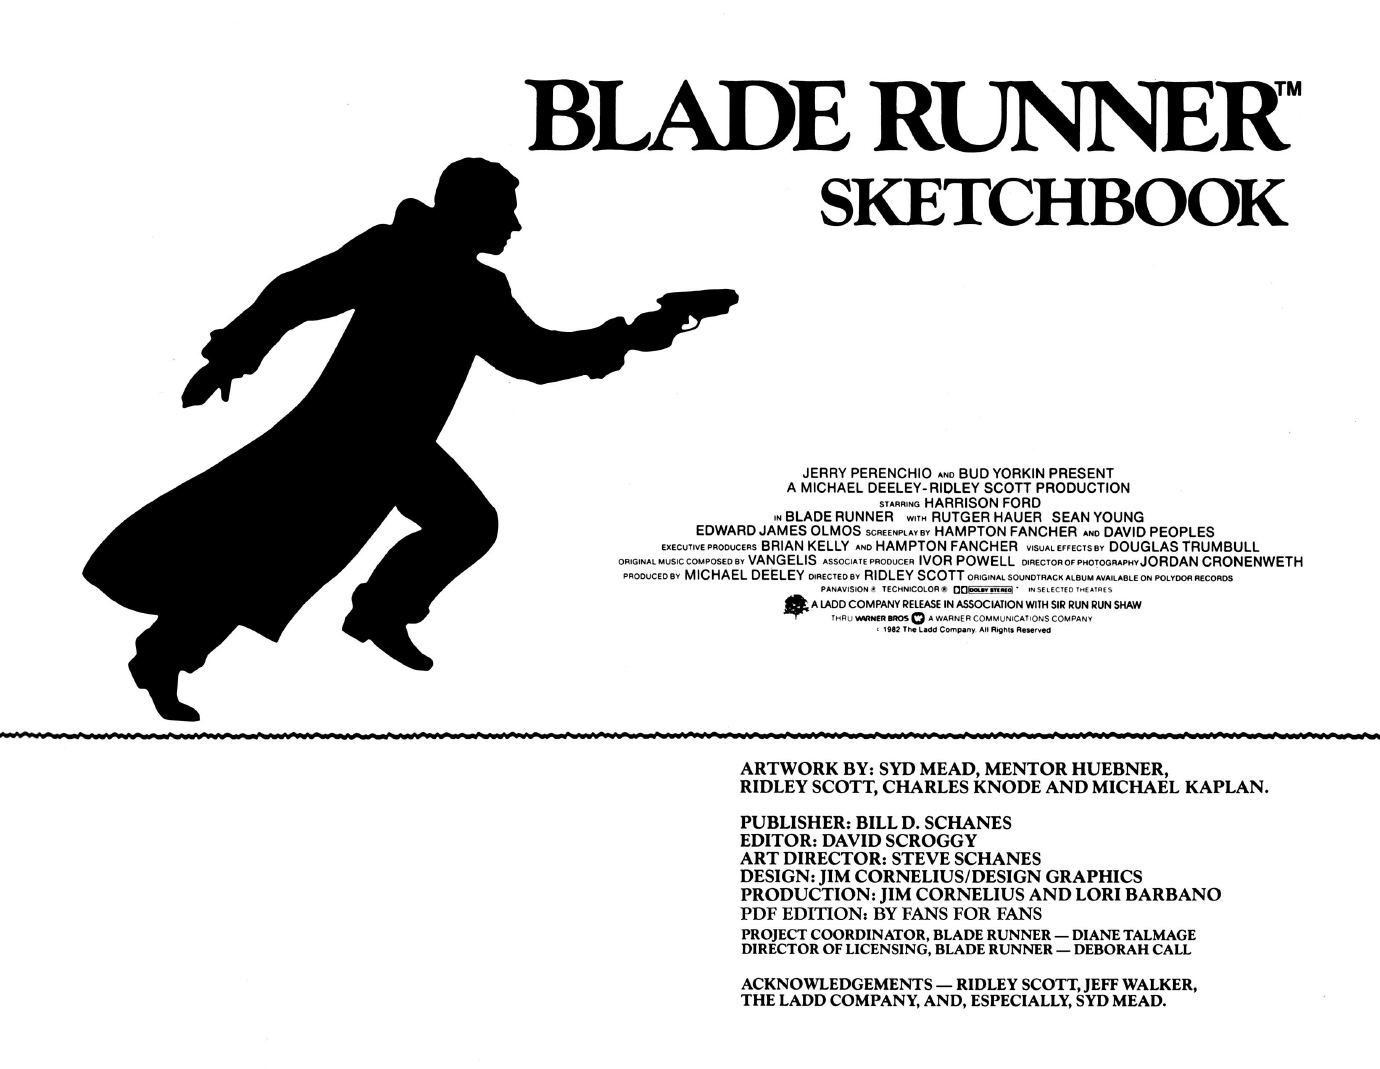 The Original Blade Runner Sketchbook - Featuring The Art Of Syd Mead